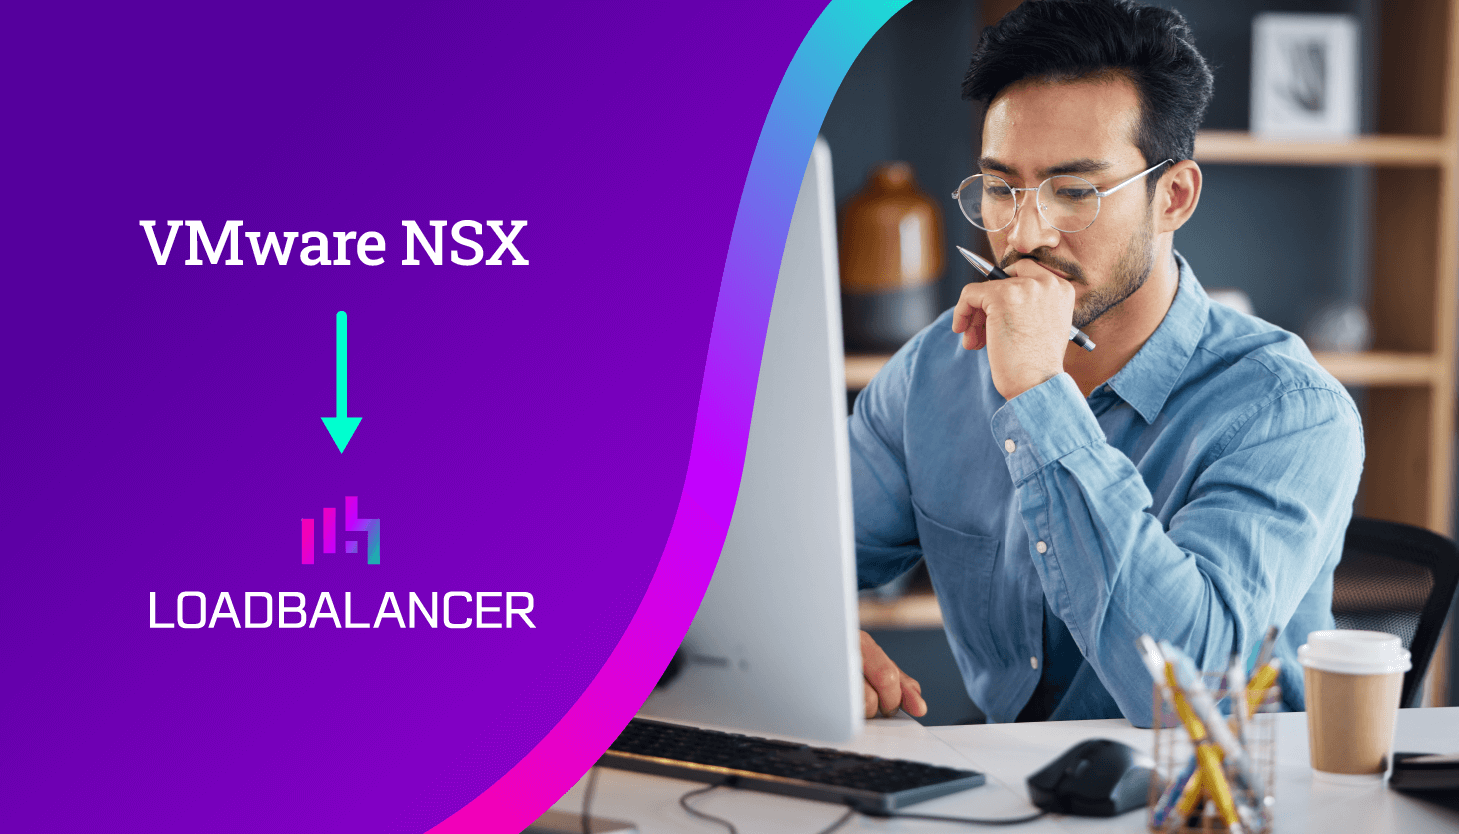 Why are customers switching from VMware NSX to dedicated application load balancers?